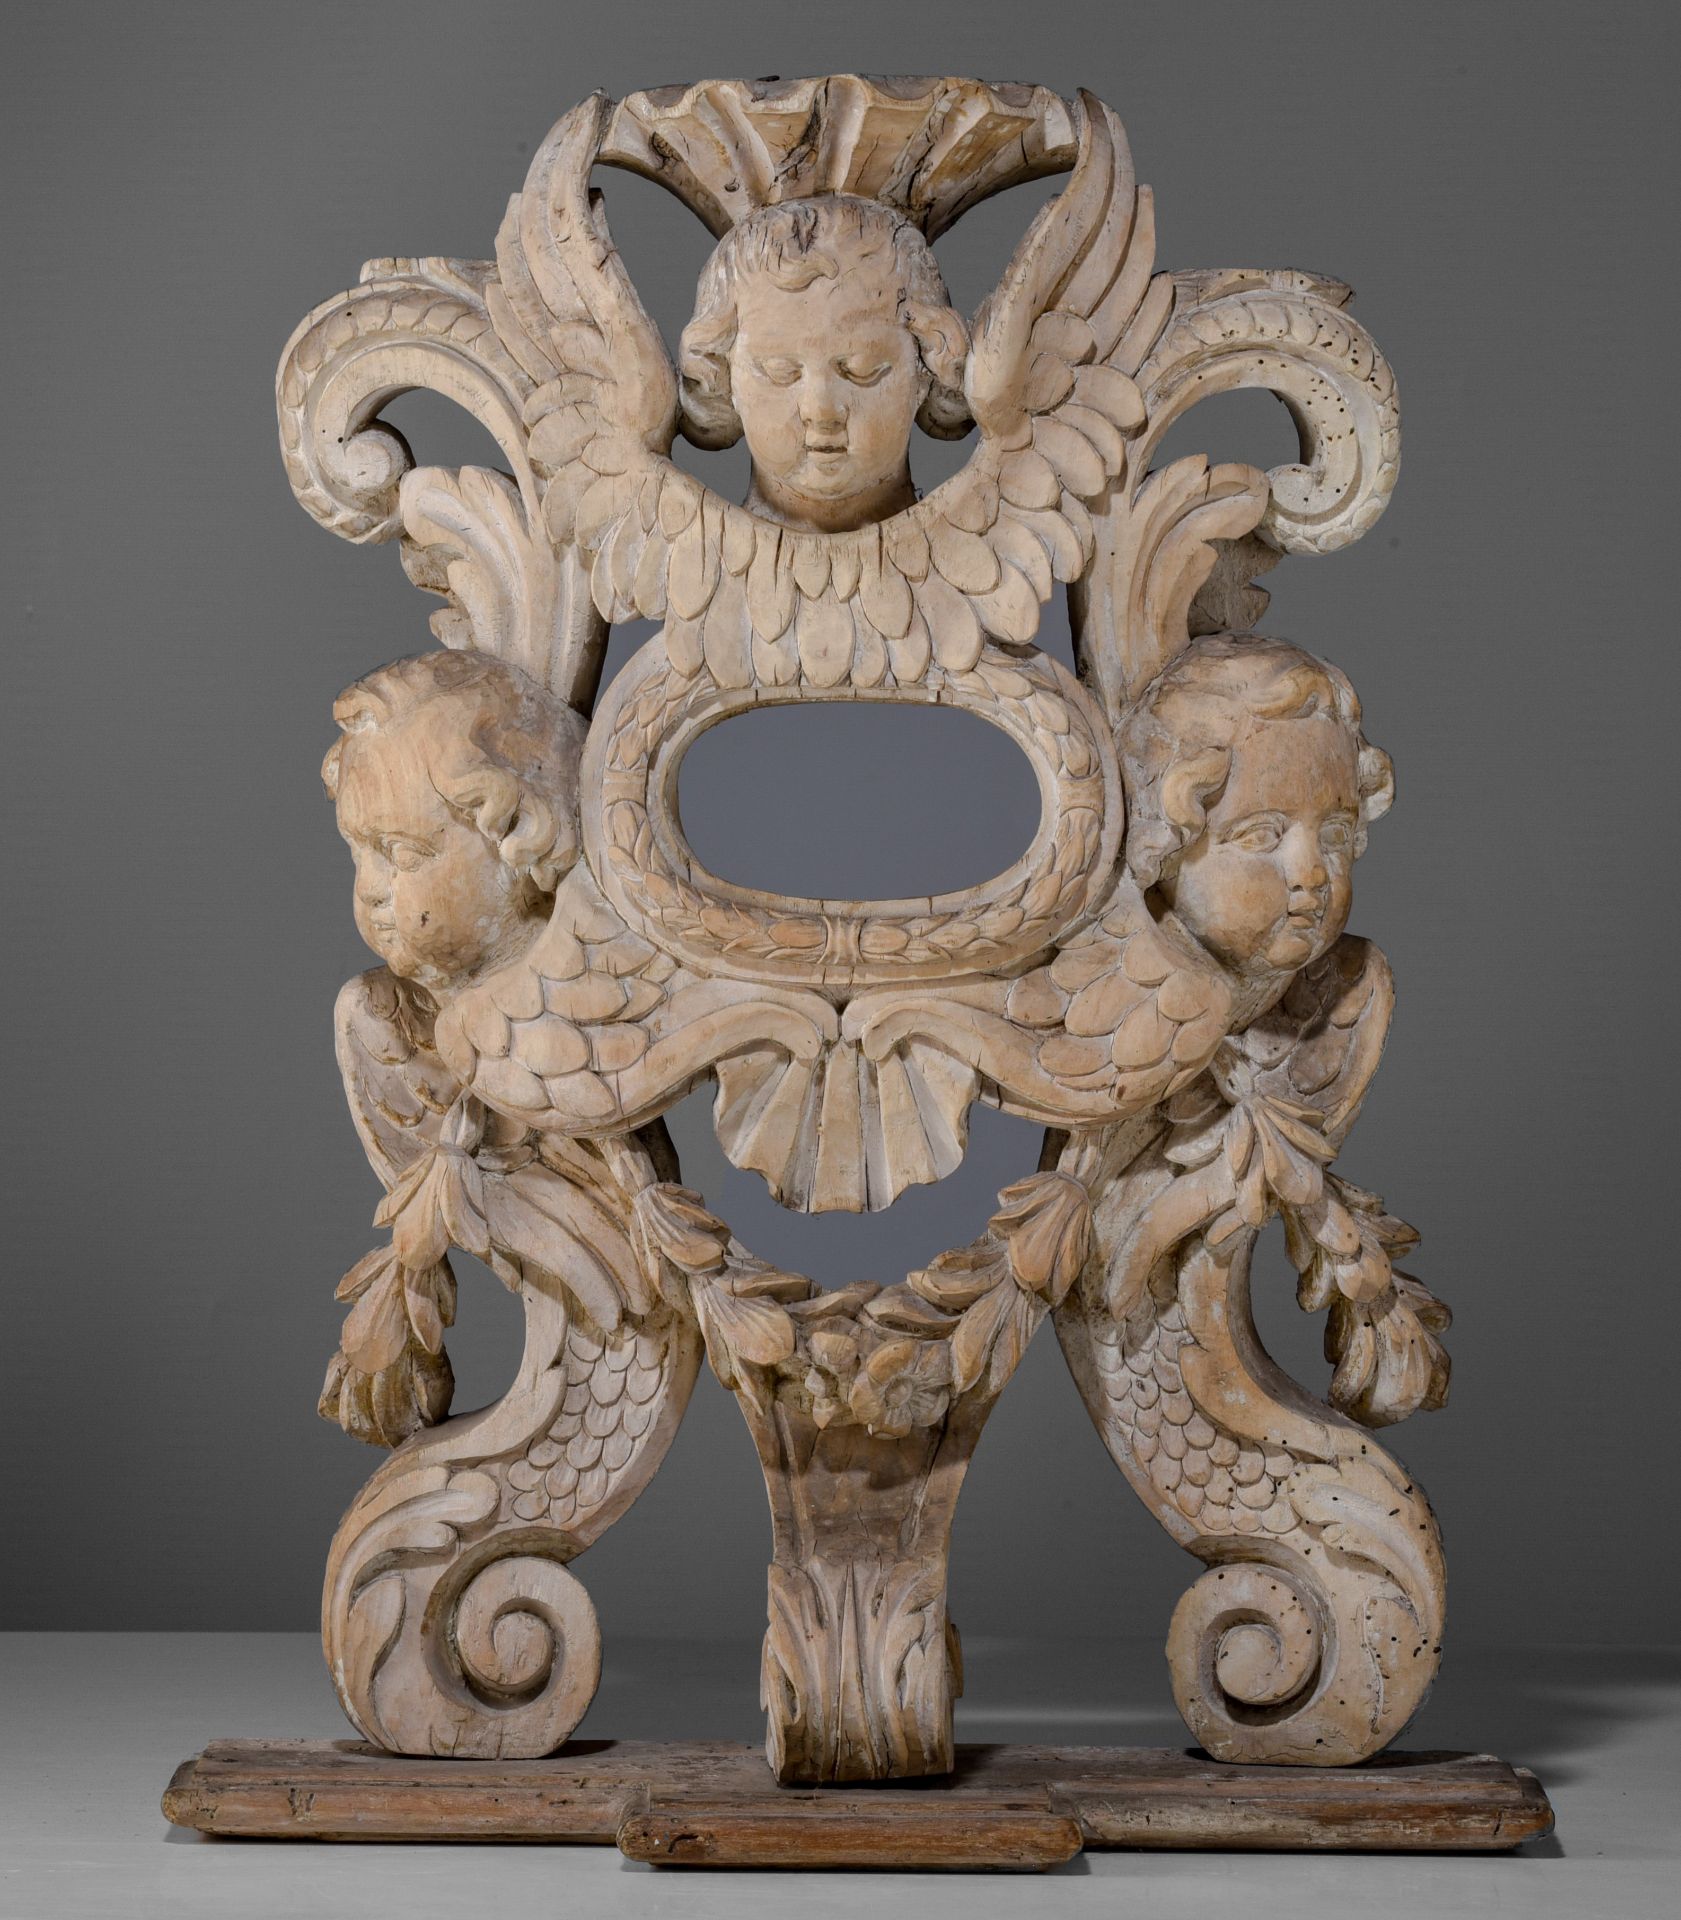 (BIDDING ONLY ON CARLOBONTE.BE) A Baroque richly carved limewood crucifix stand, H 56 cm - Image 3 of 10